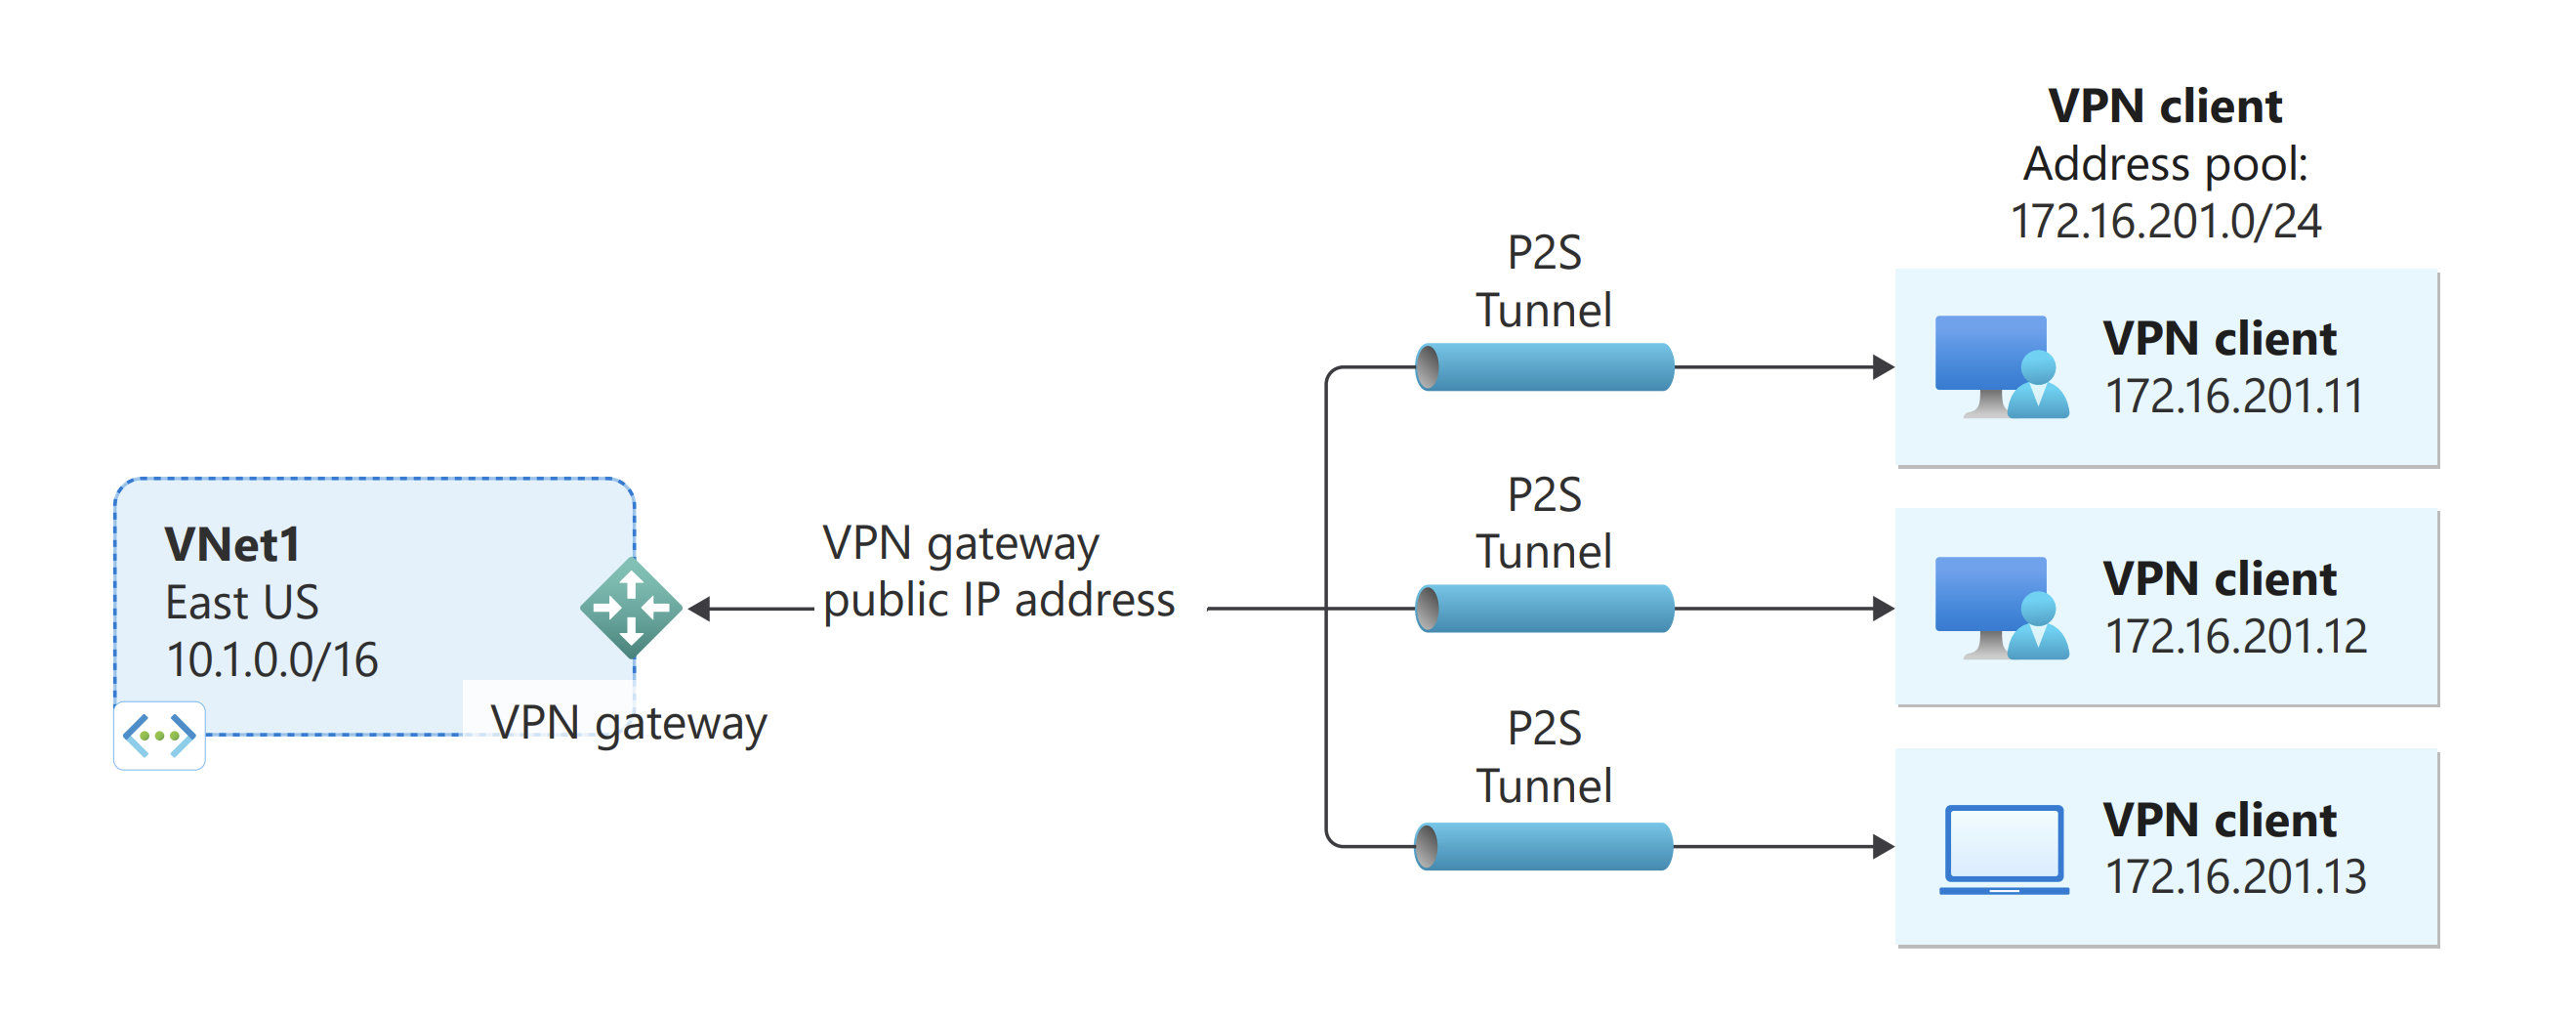 What is the difference between VPN gateway and site to site?